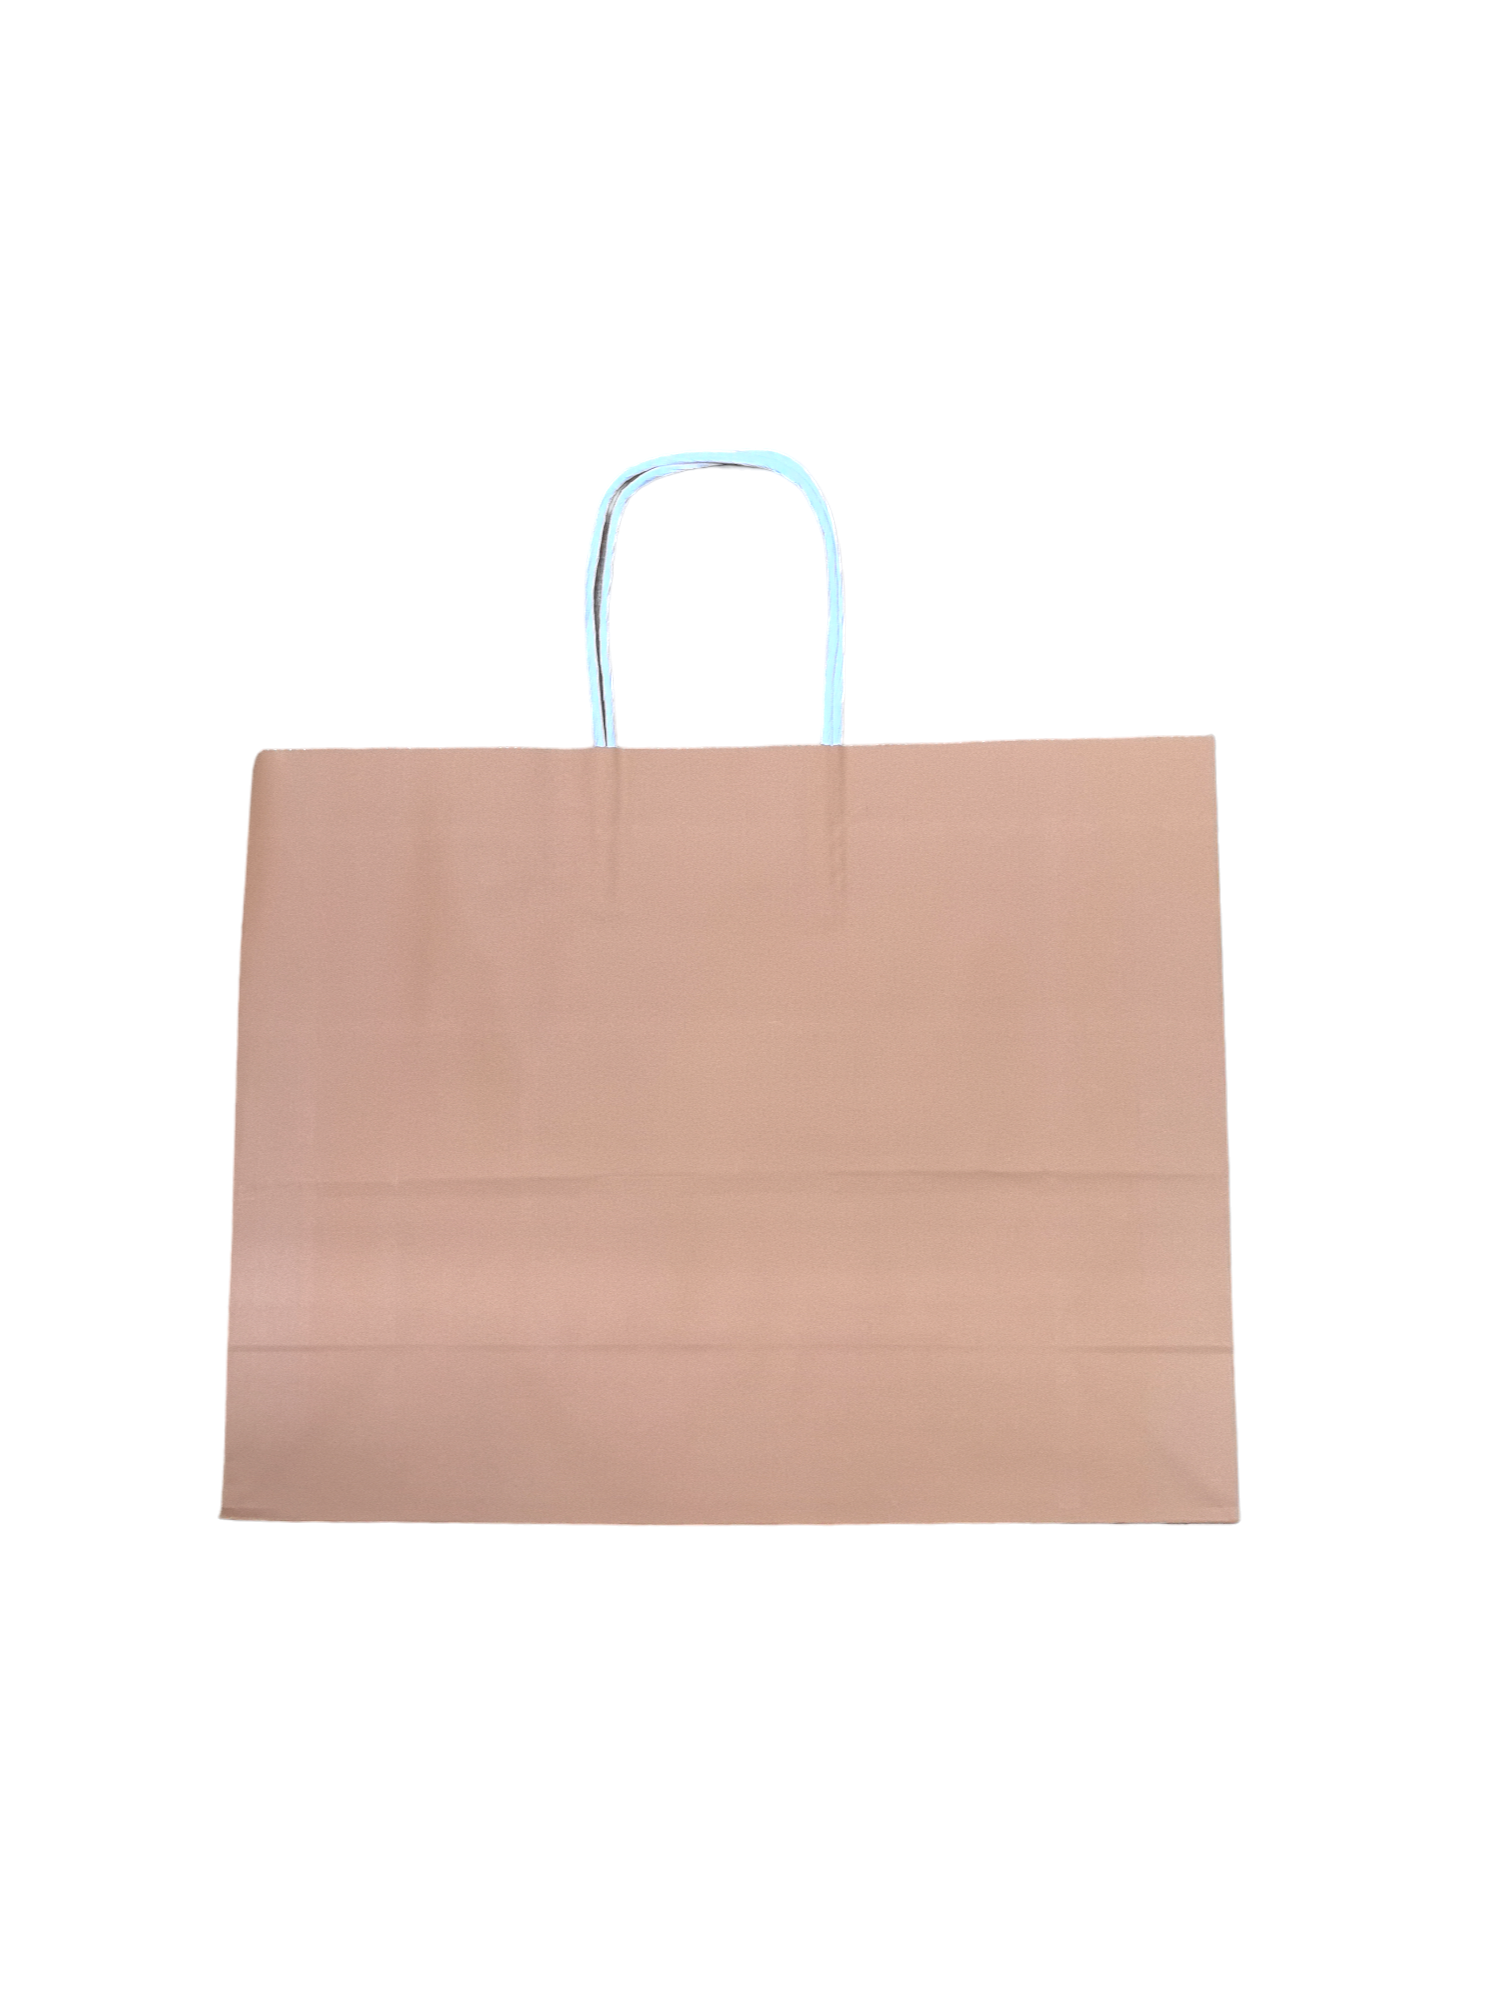 SET OF 24 - Boutique kraft bags (colors of your choice) T32*25*11